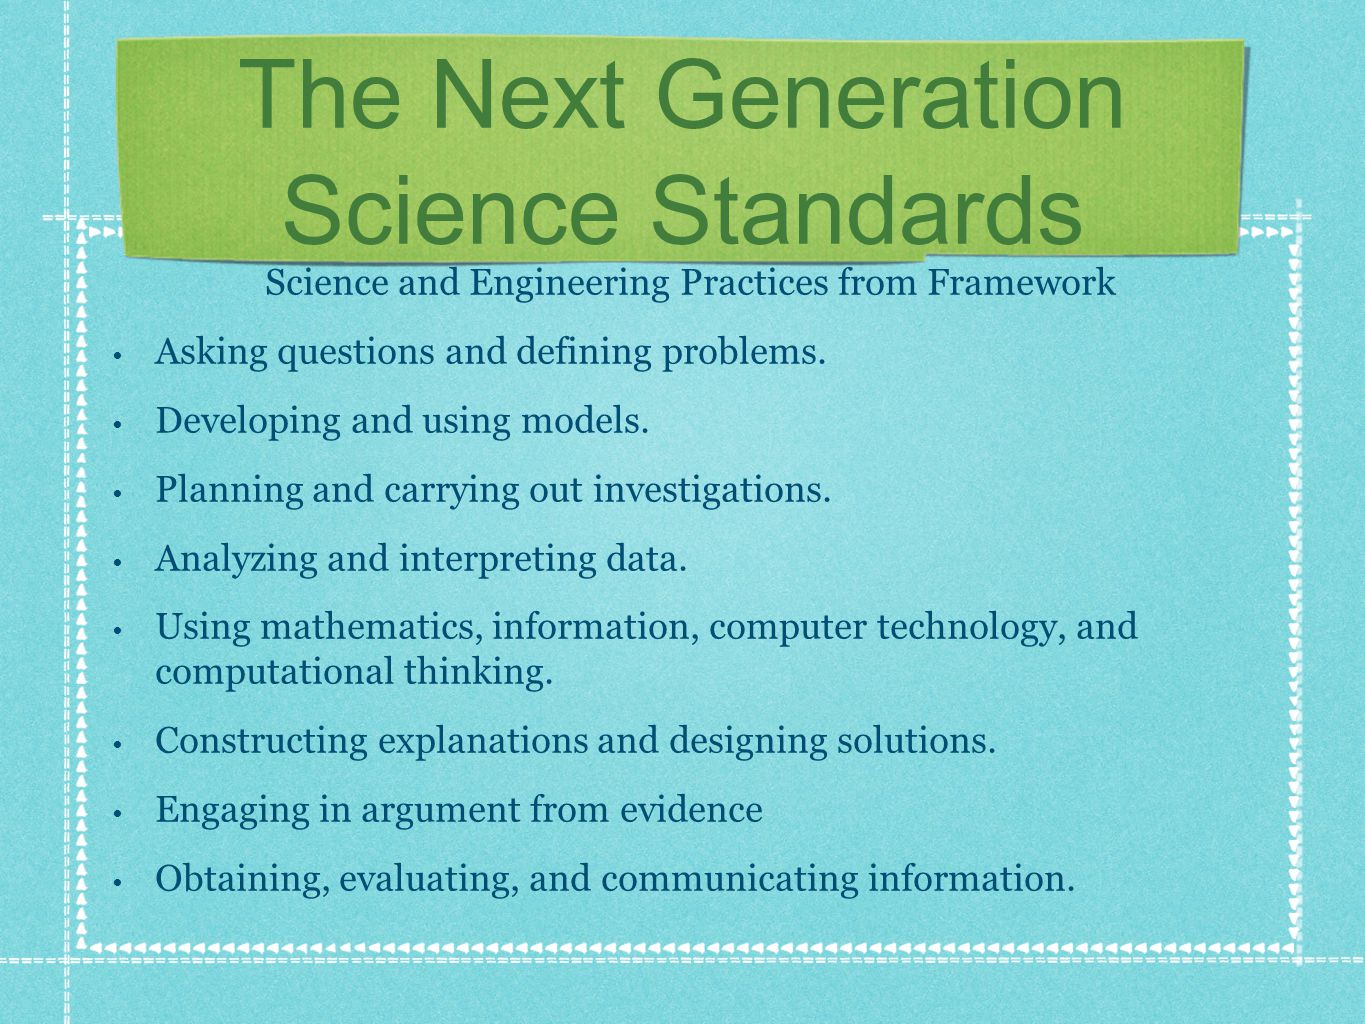 The Next Generation Science Standards Science and Engineering Practices from Framework Asking questions and defining problems.